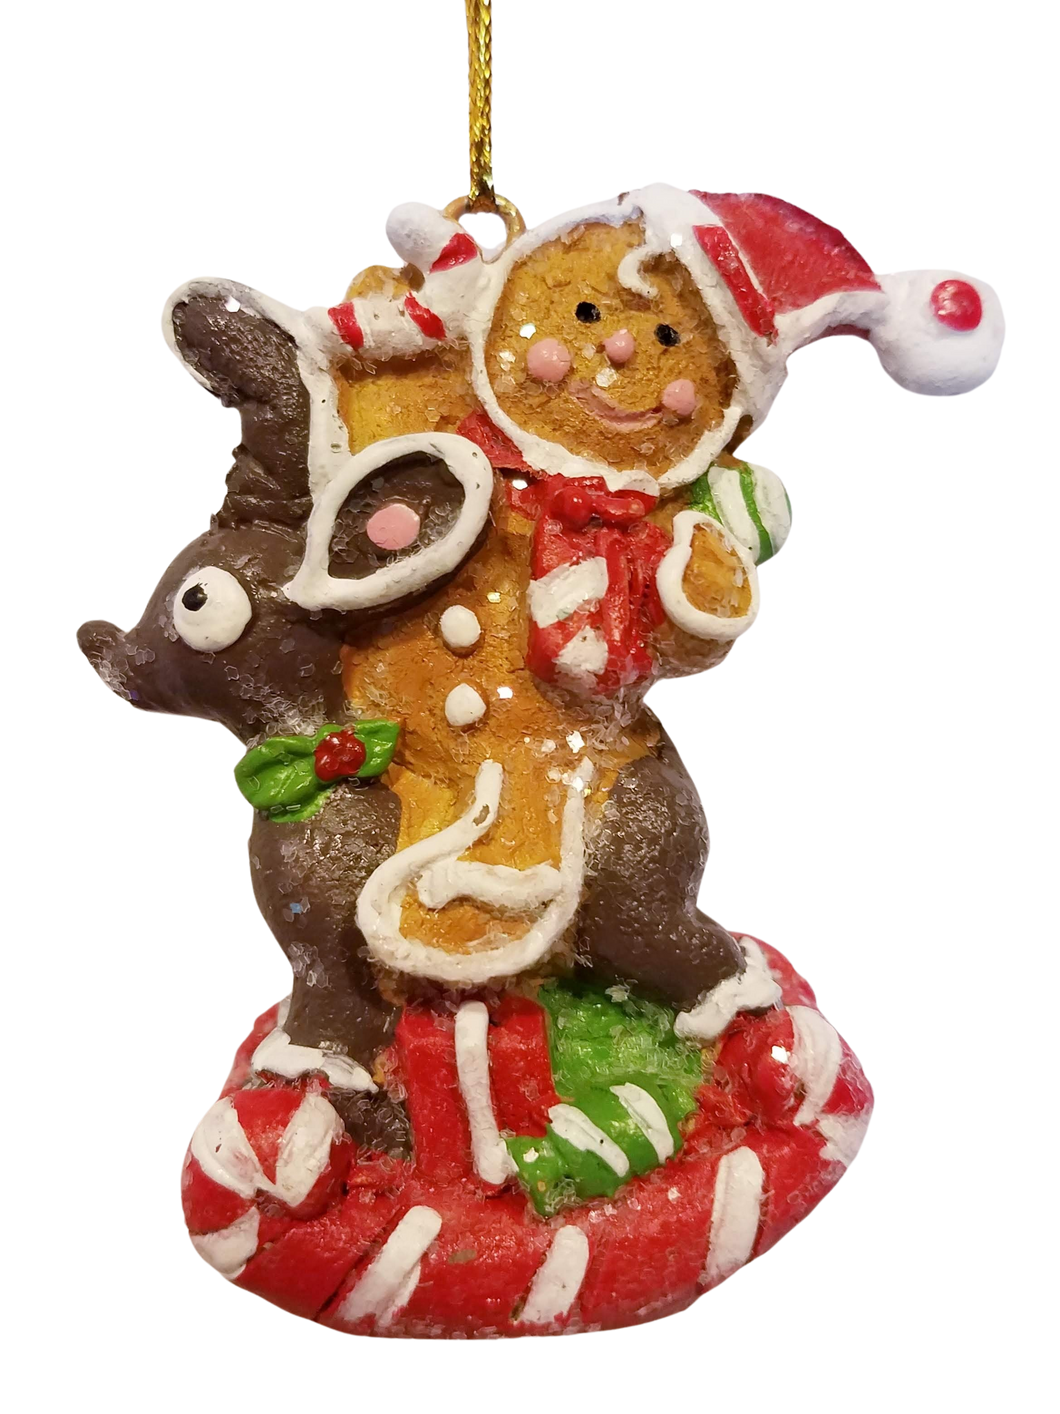 Gingerbread Man Resin Ornament Sitting on Reindeer Holding Candy Cane/Present 3